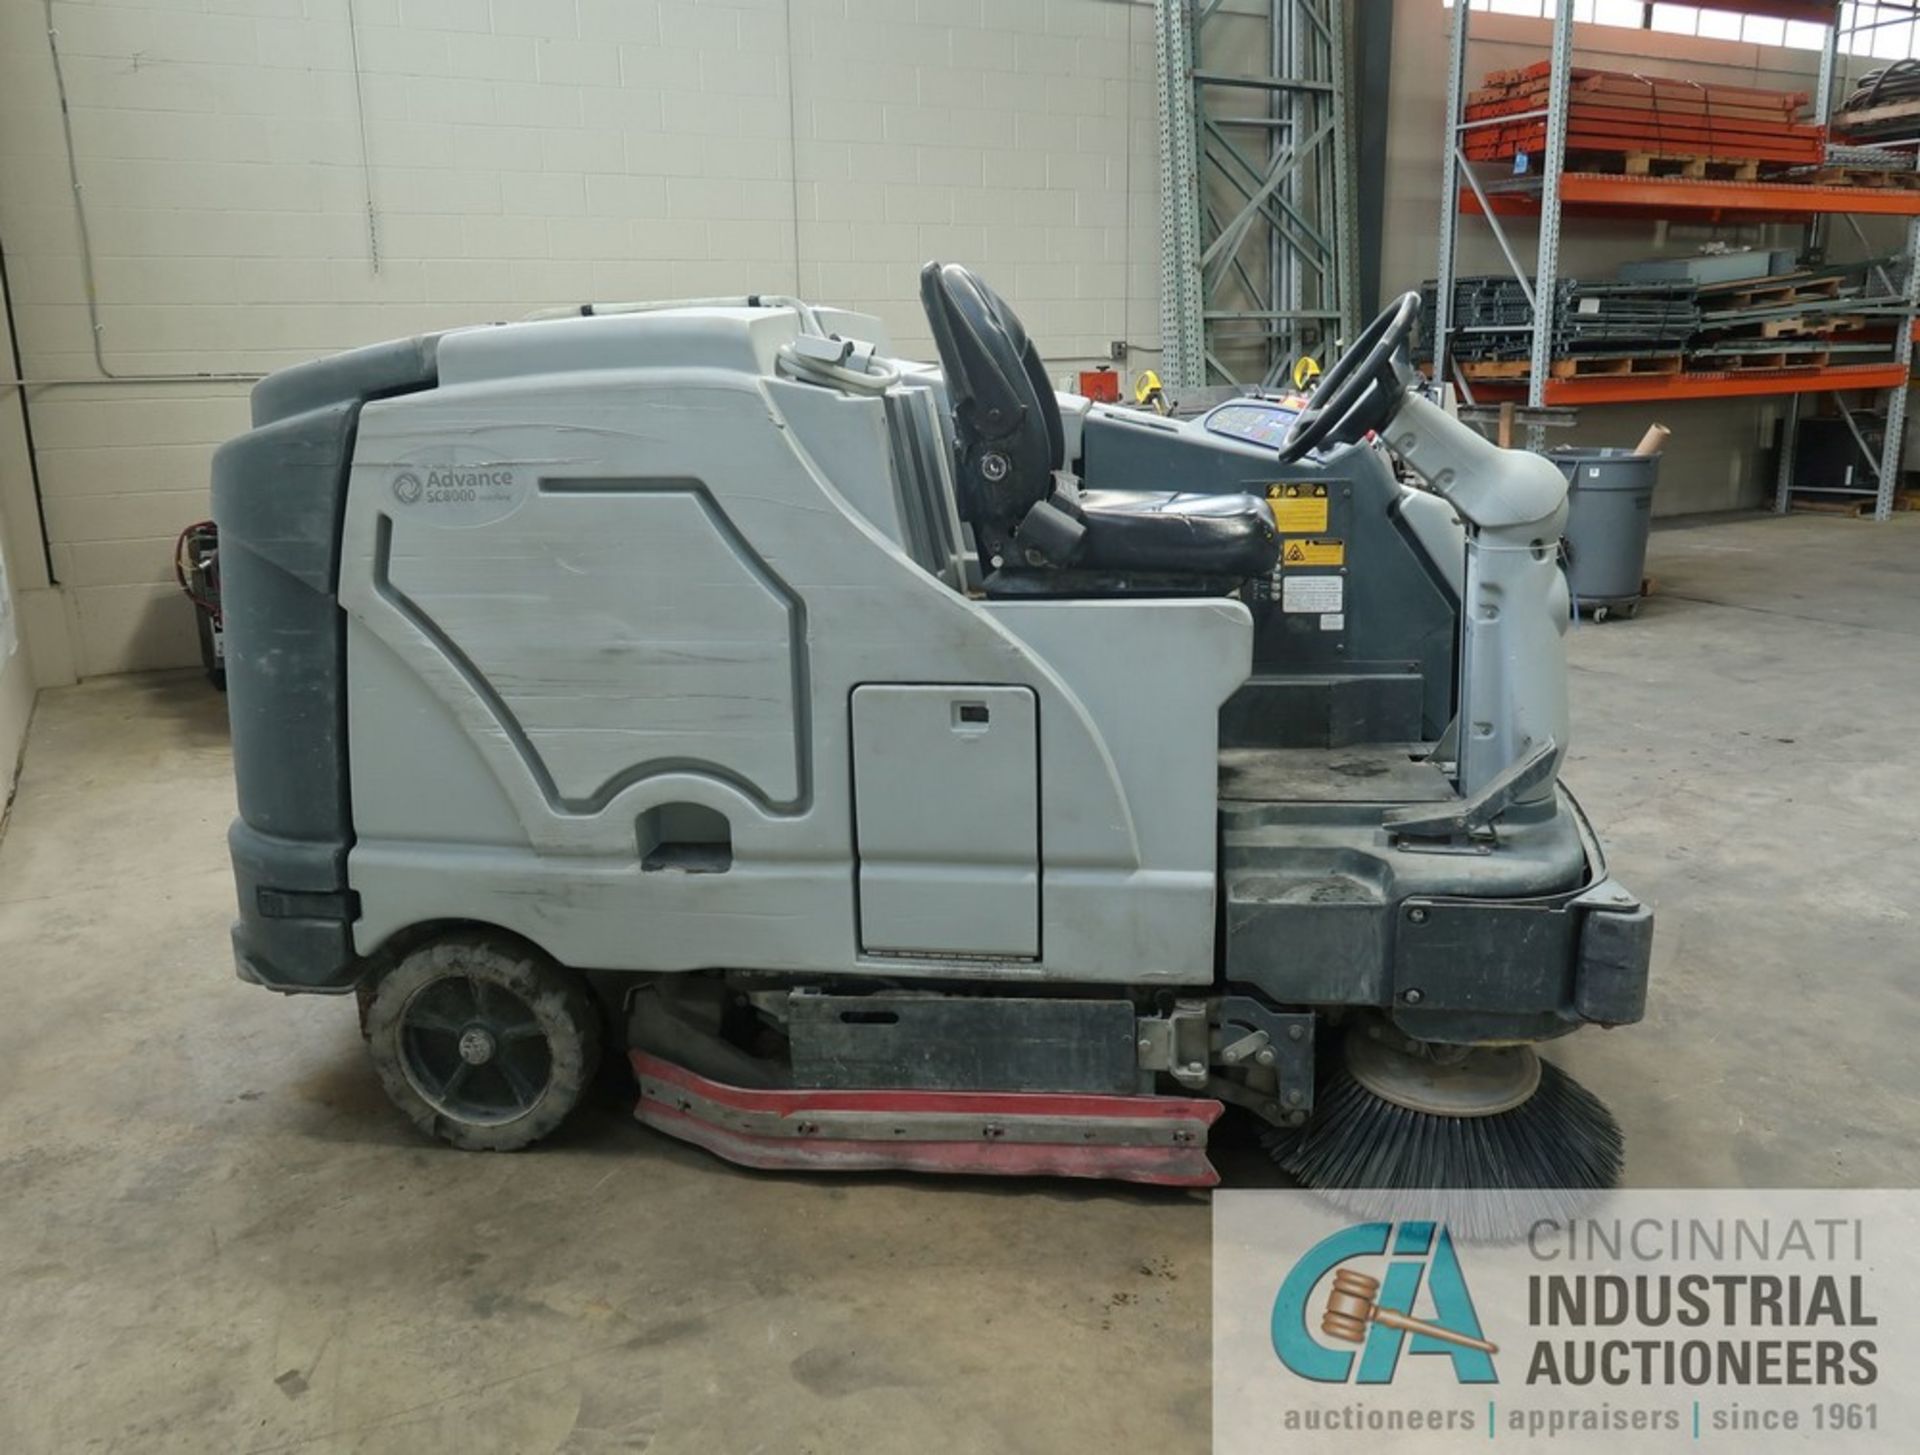 2019 ADVANCE MODEL SC8000 LP GAS FLOOR SCRUBBER; S/N 1000069070, 1,198 HOURS SHOWING - Image 6 of 11